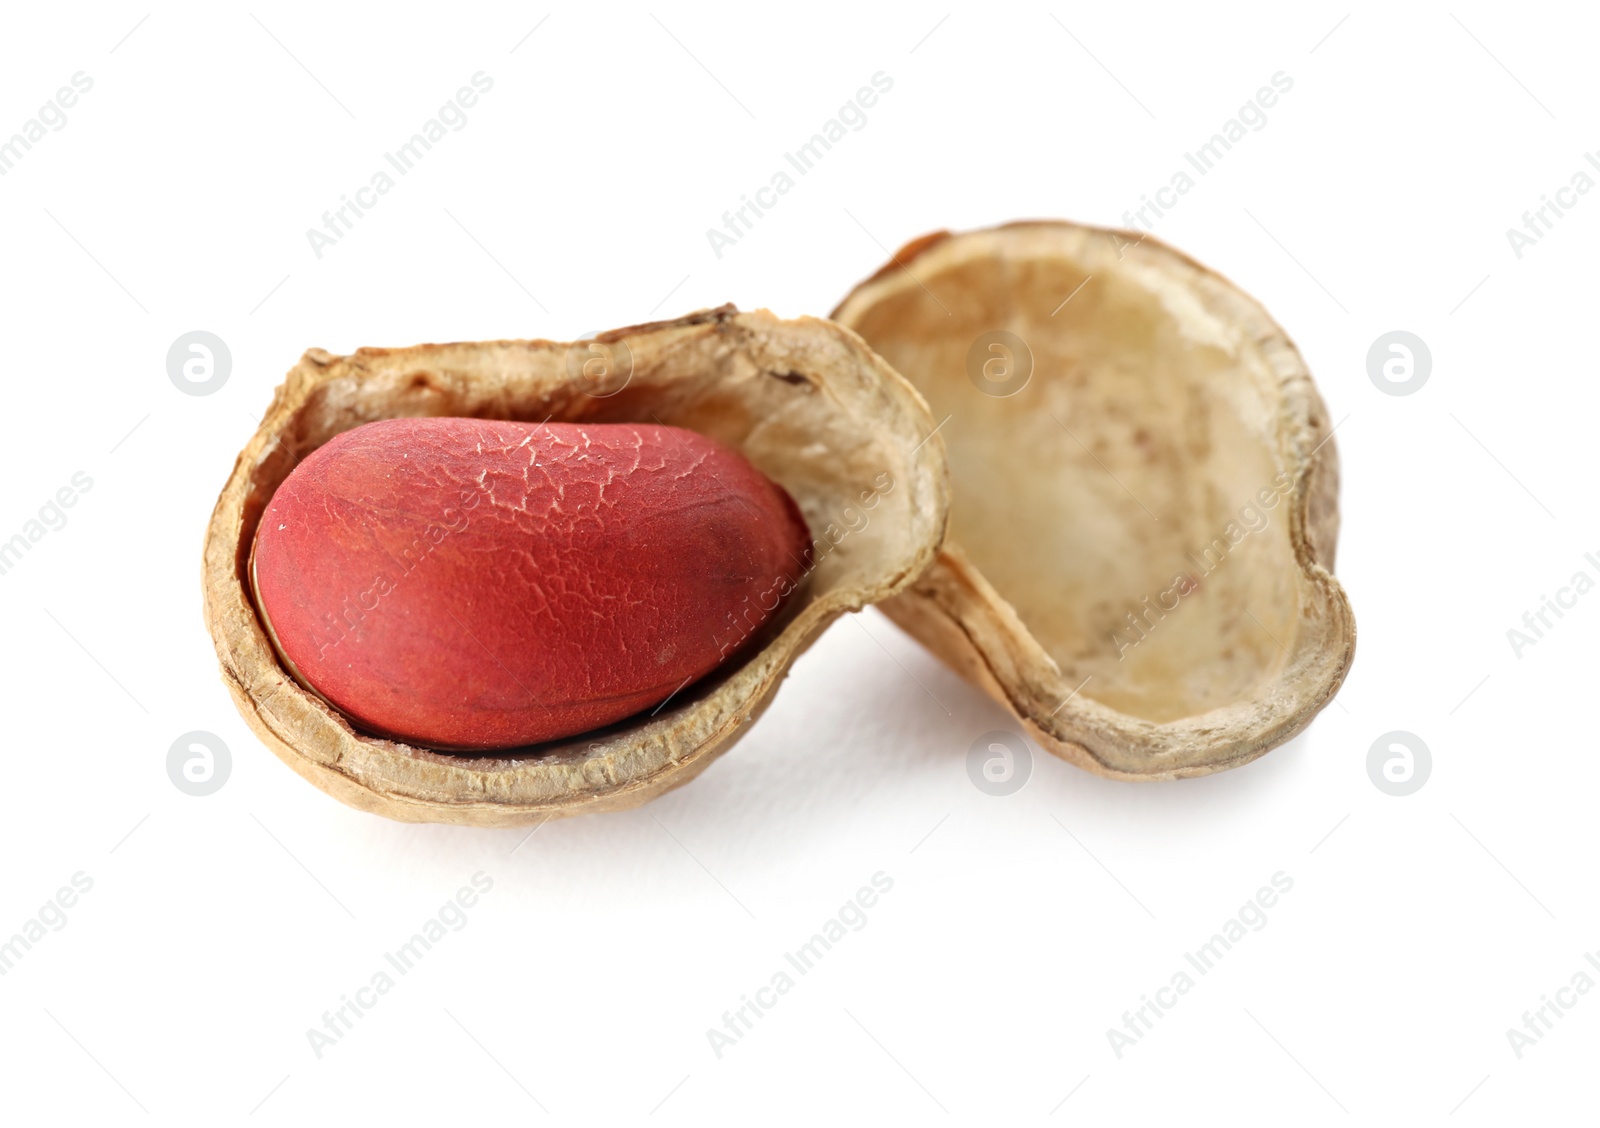 Photo of Raw peanut in shell on white background